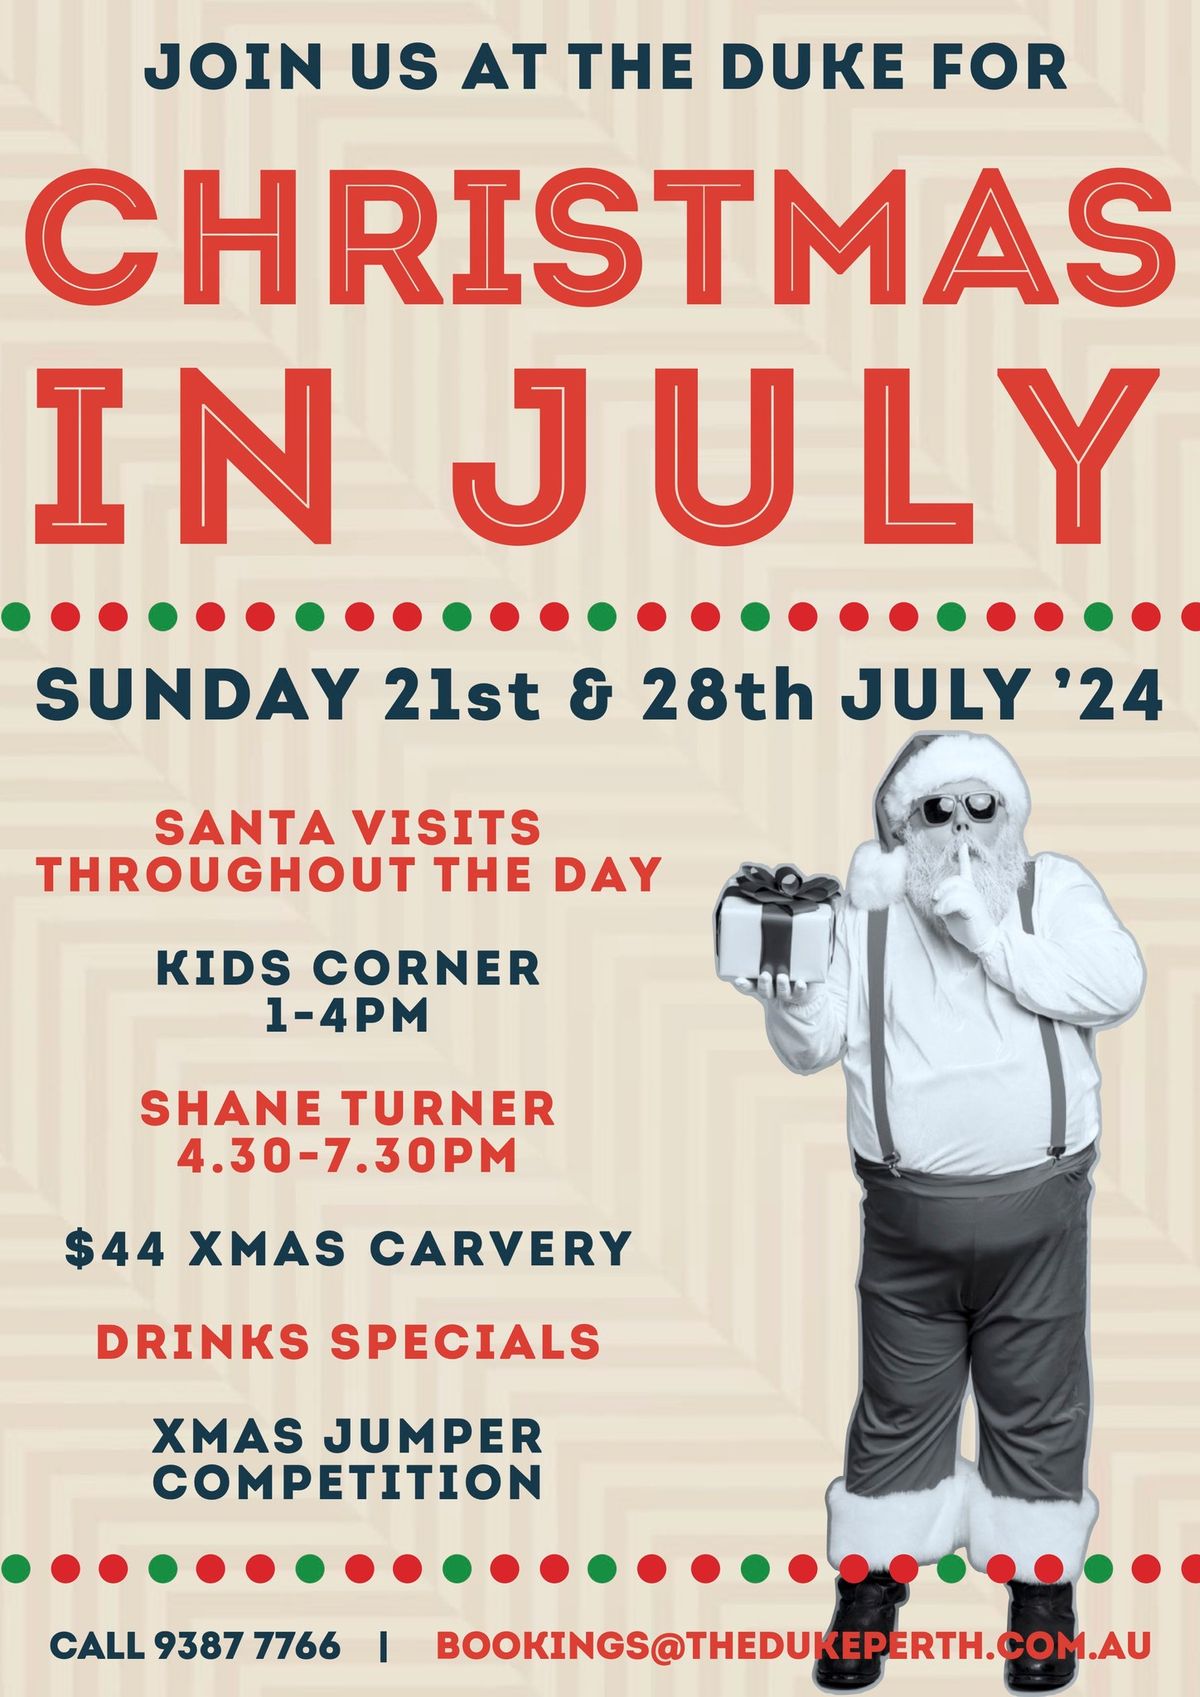 The Duke's Christmas in July Family Day